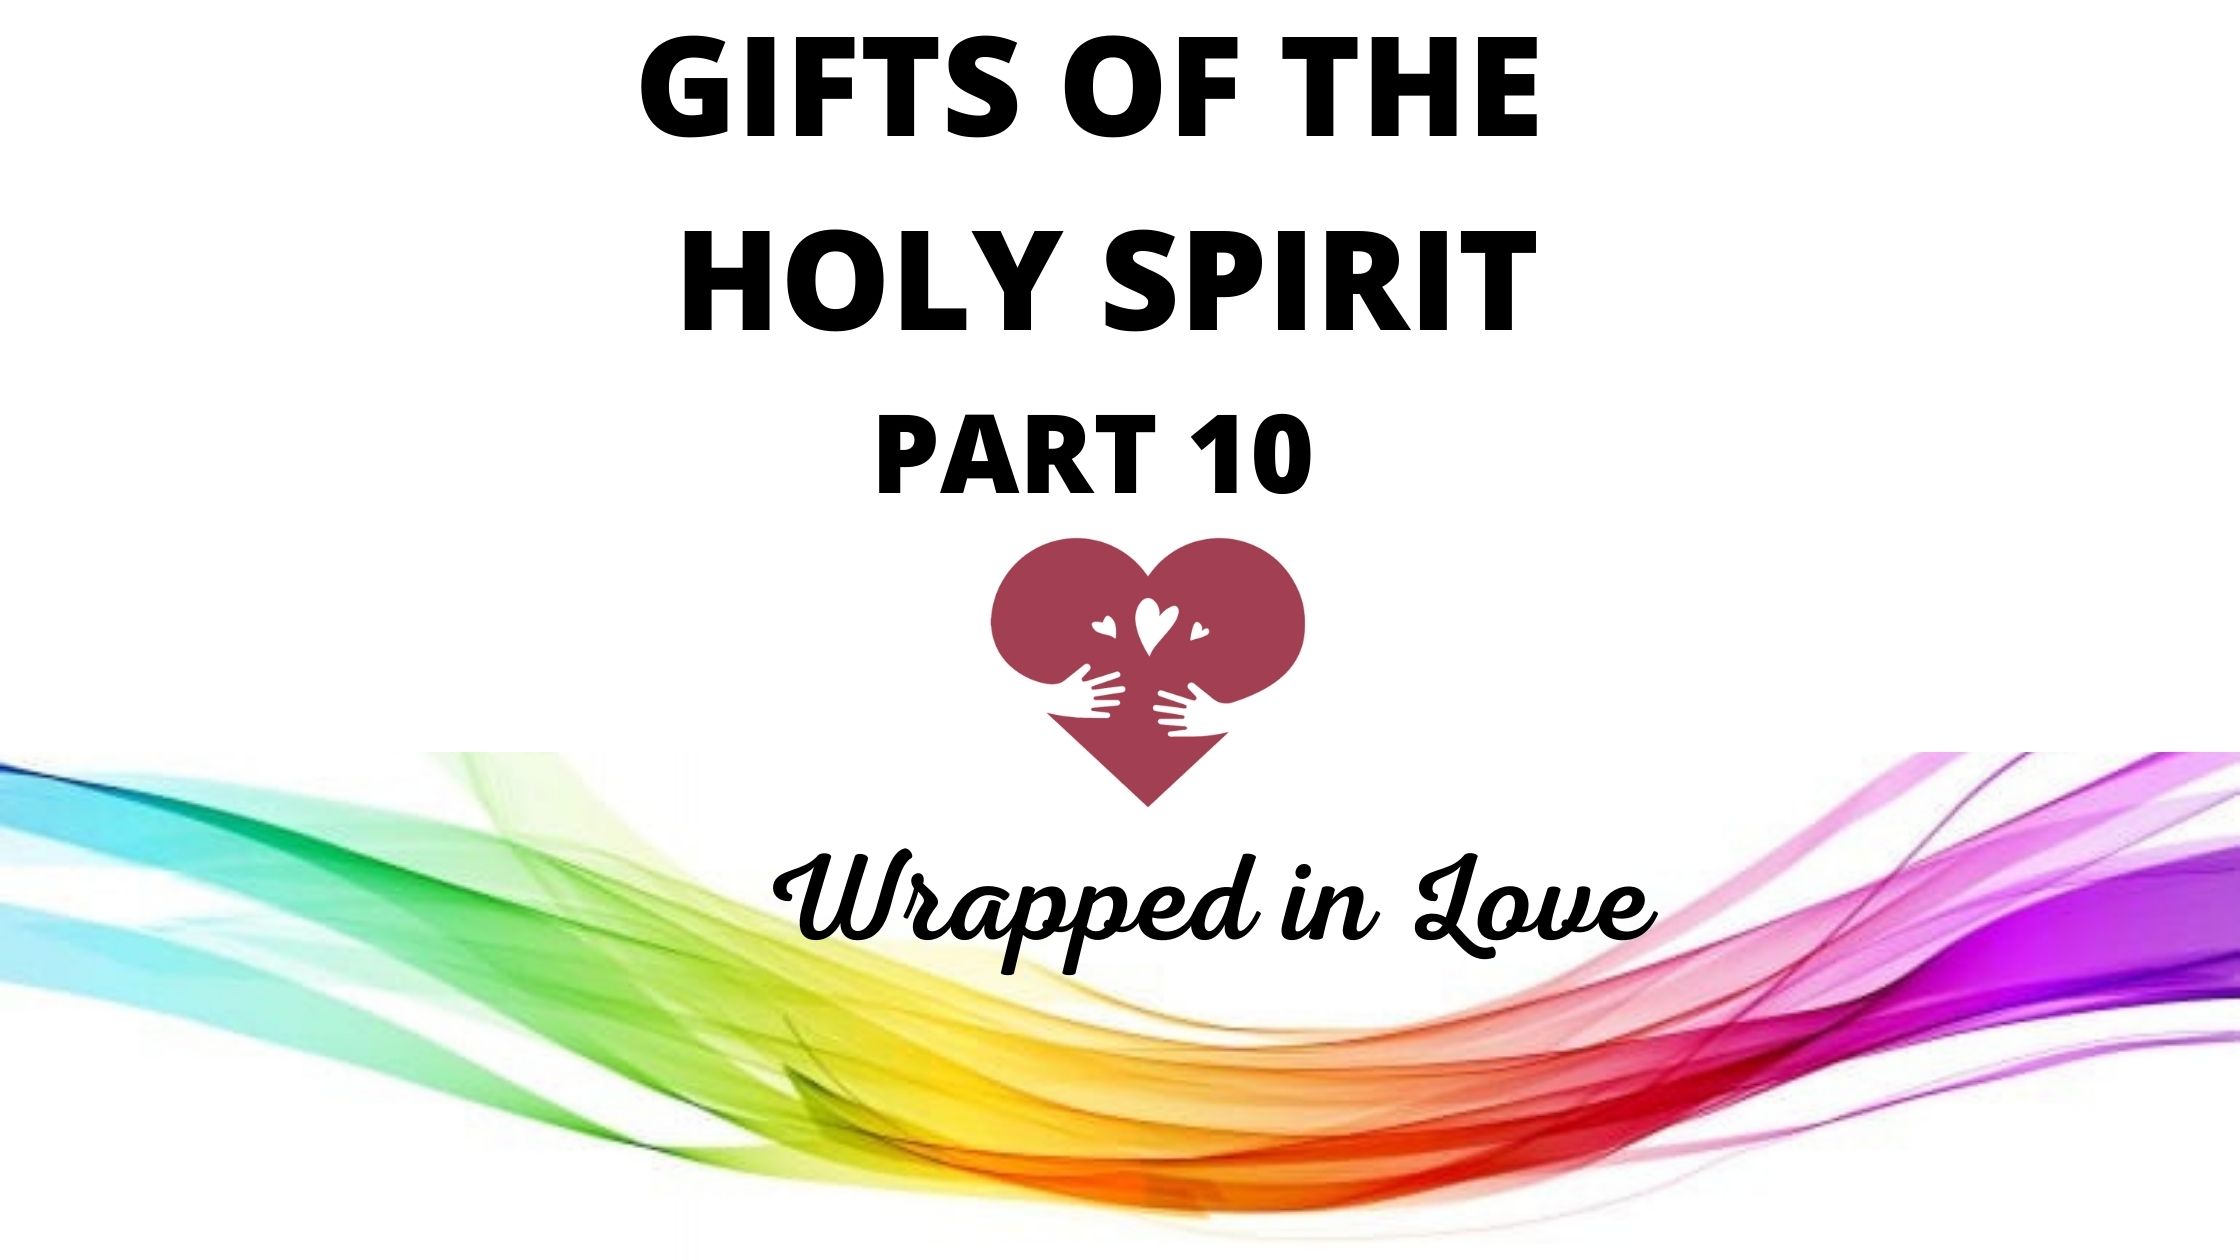 gifts-of-the-holy-spirit-part-10-word-of-grace-church-pune